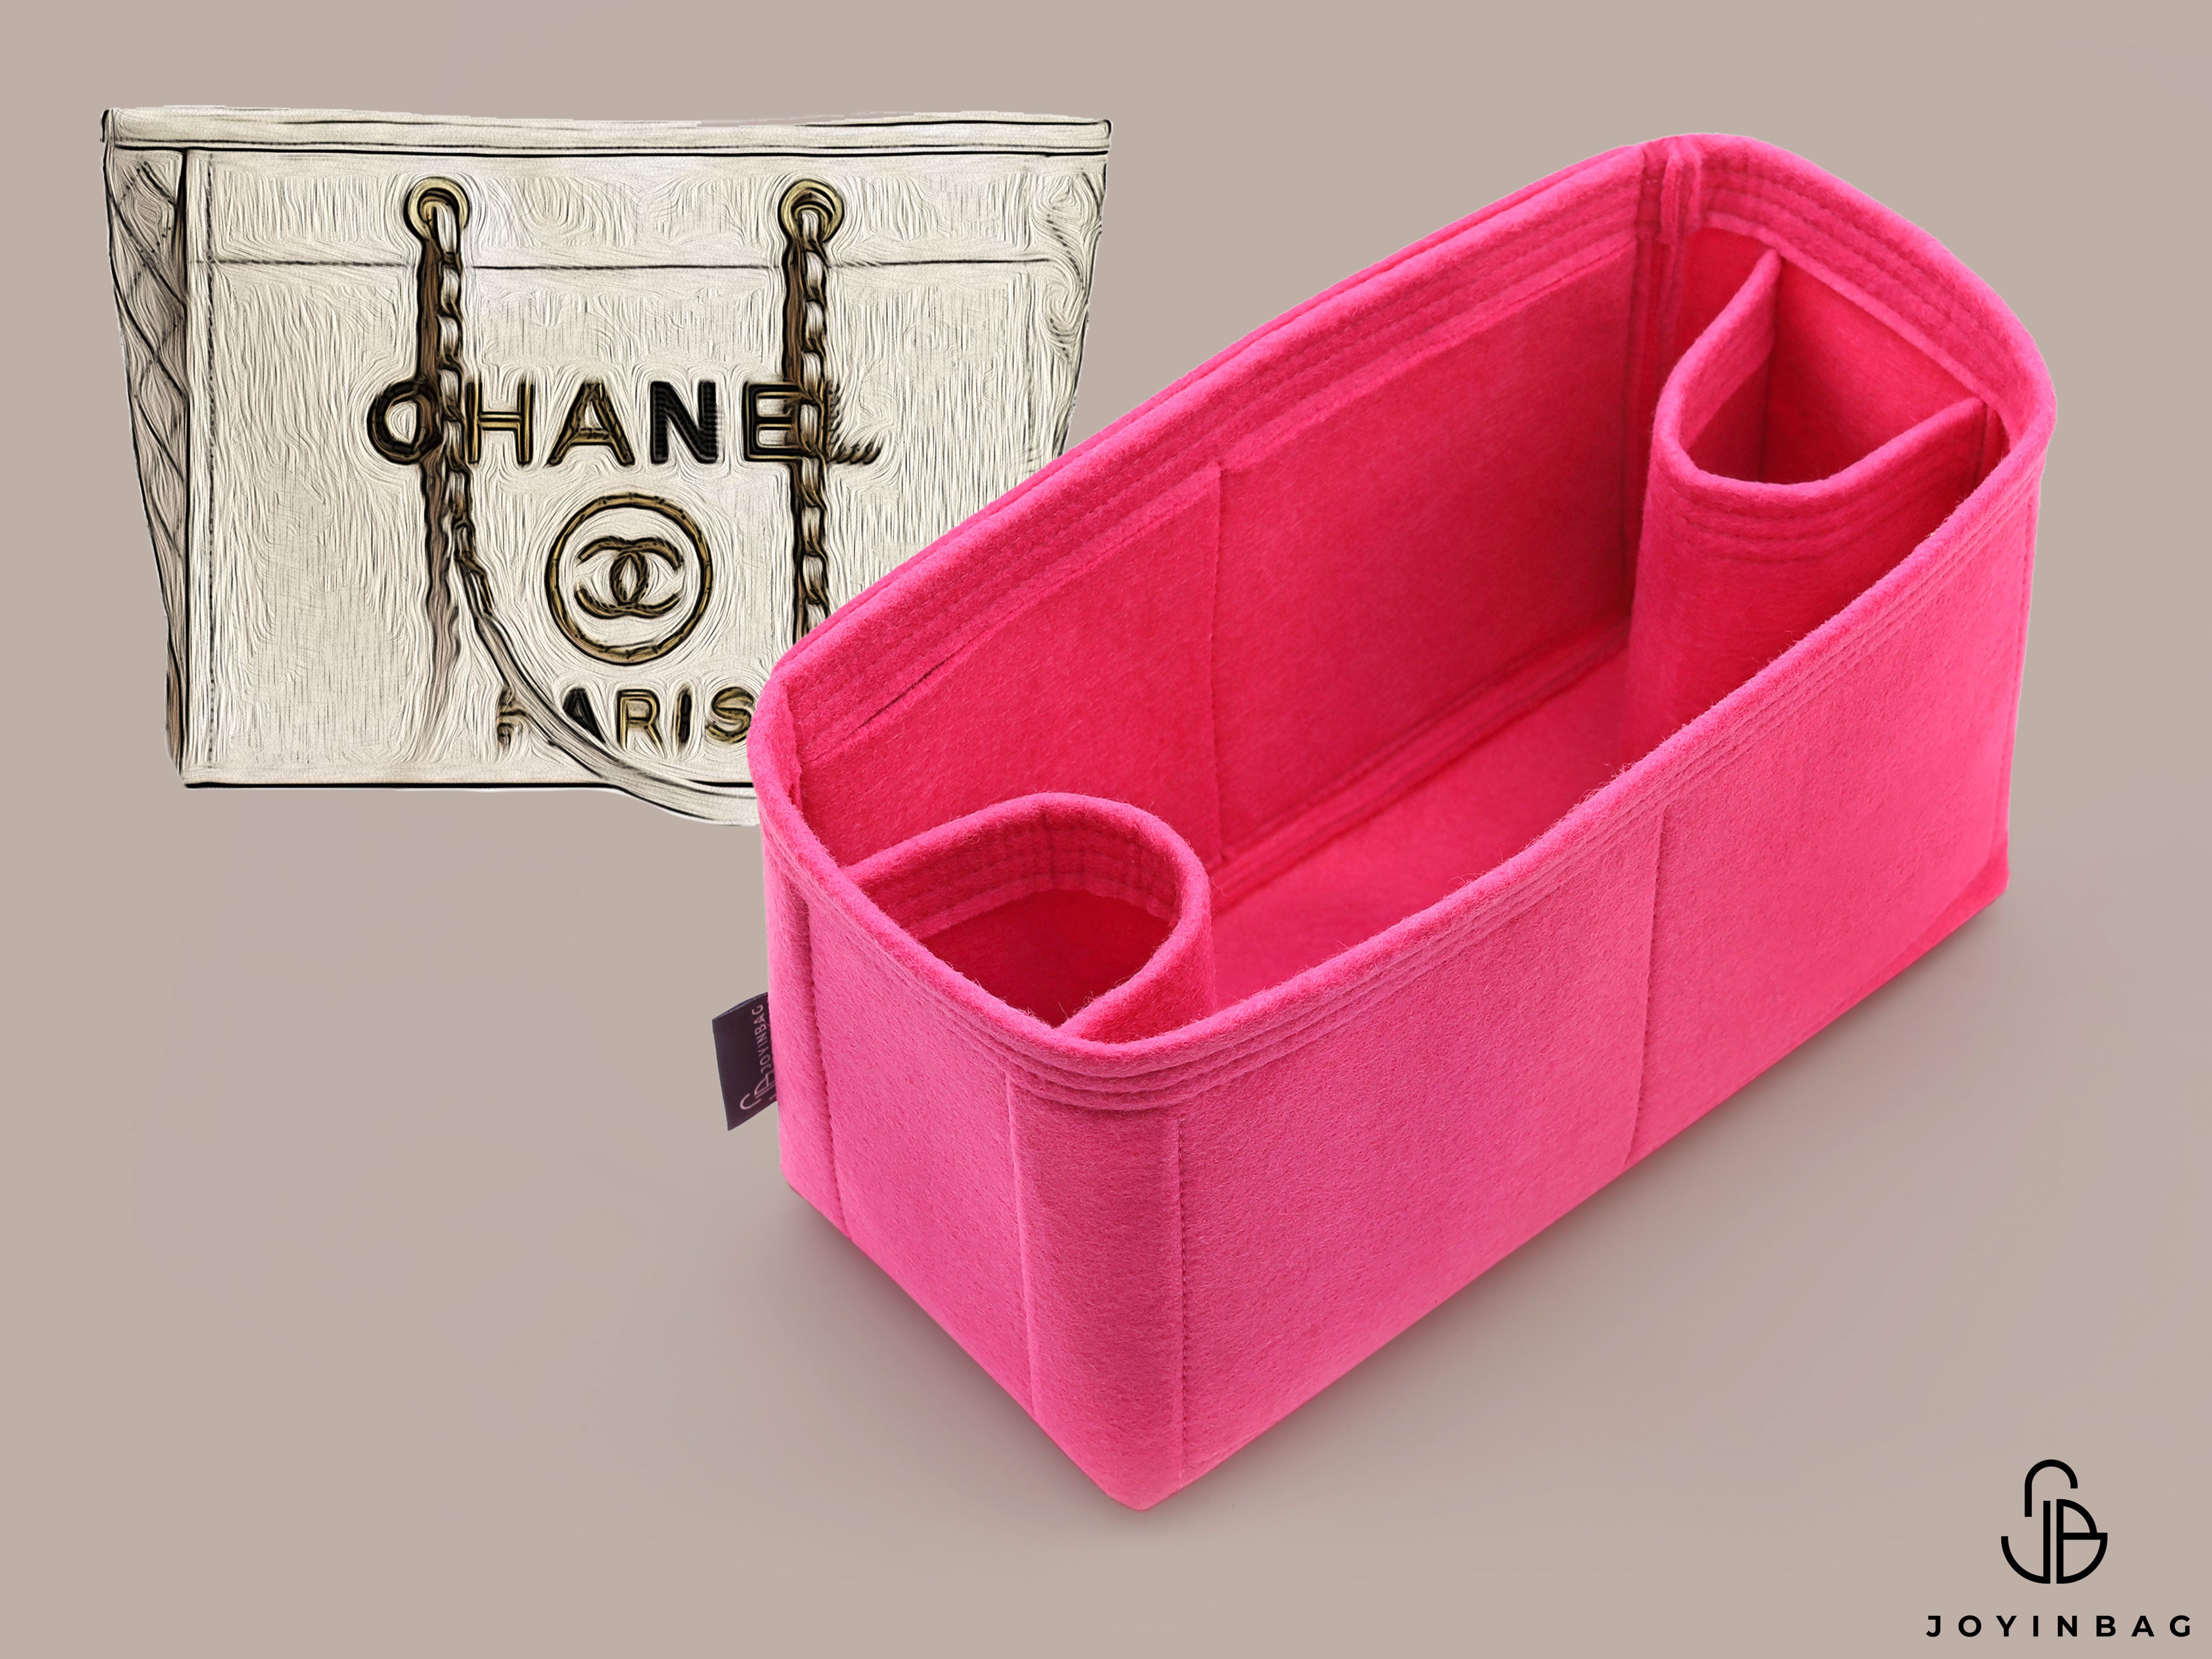 Tote Bag Organizer For Chanel Shopping Bag with Double Bottle Holders